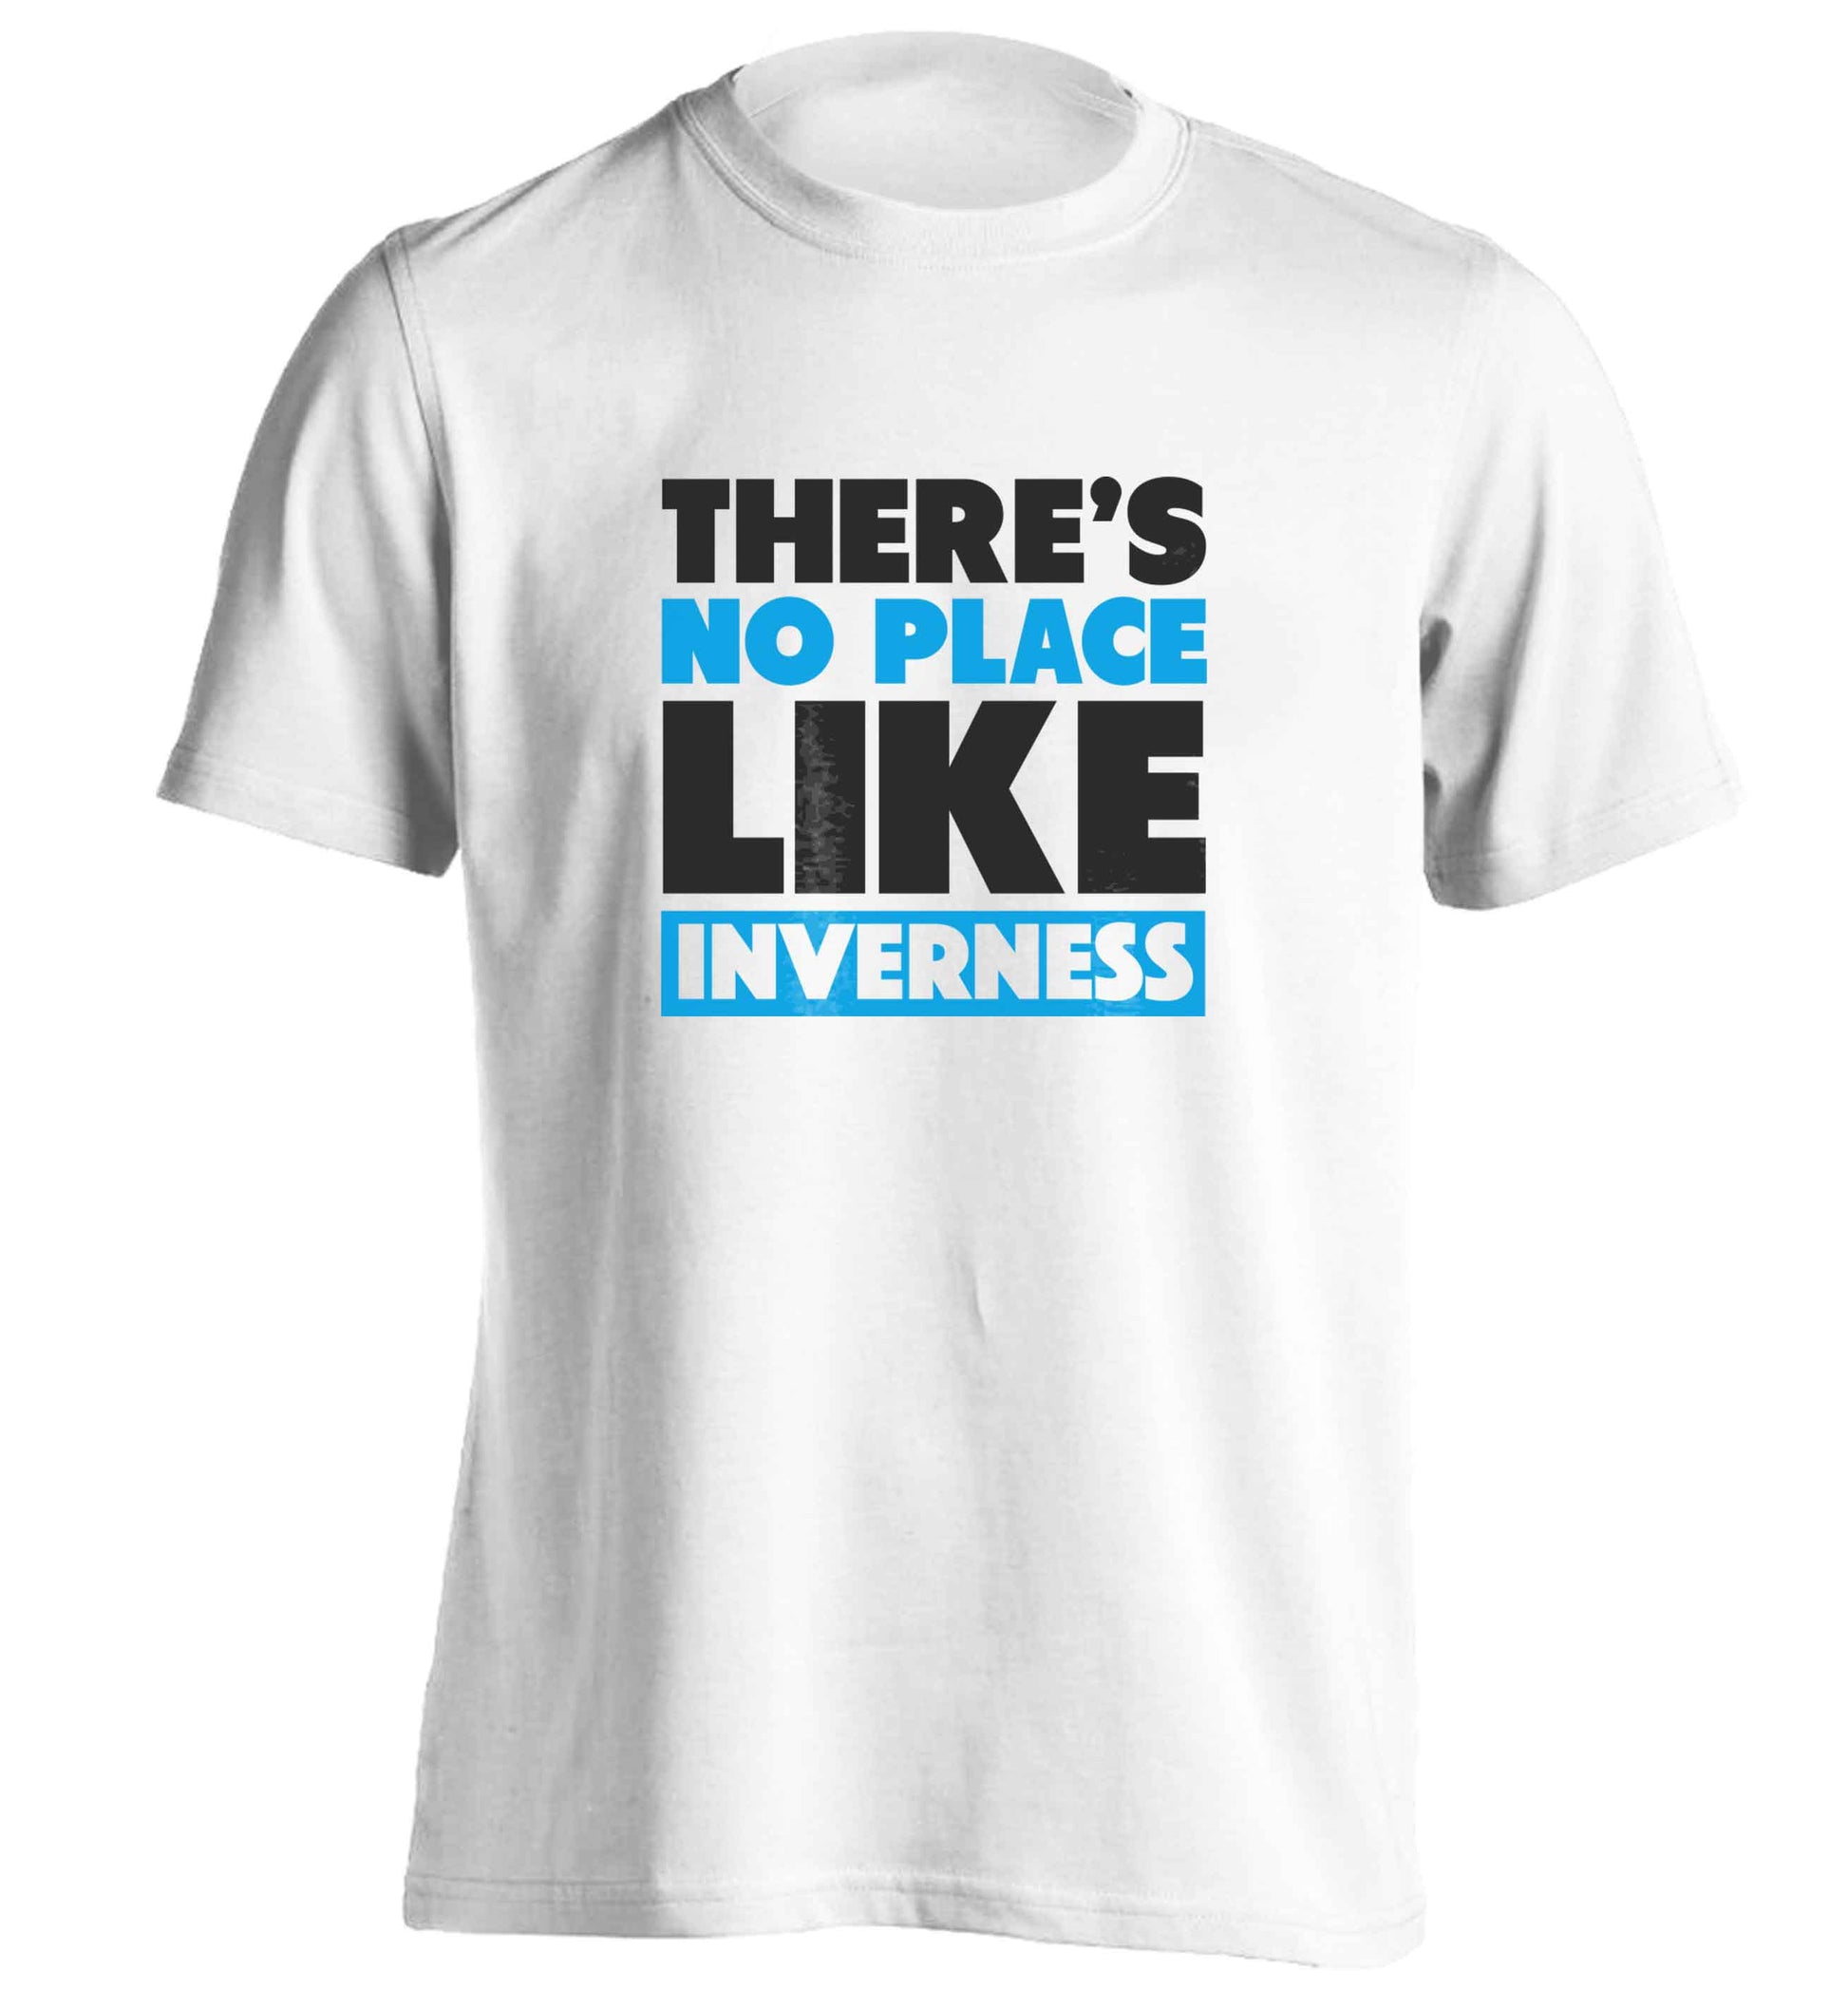 There's no place like Inverness adults unisex white Tshirt 2XL